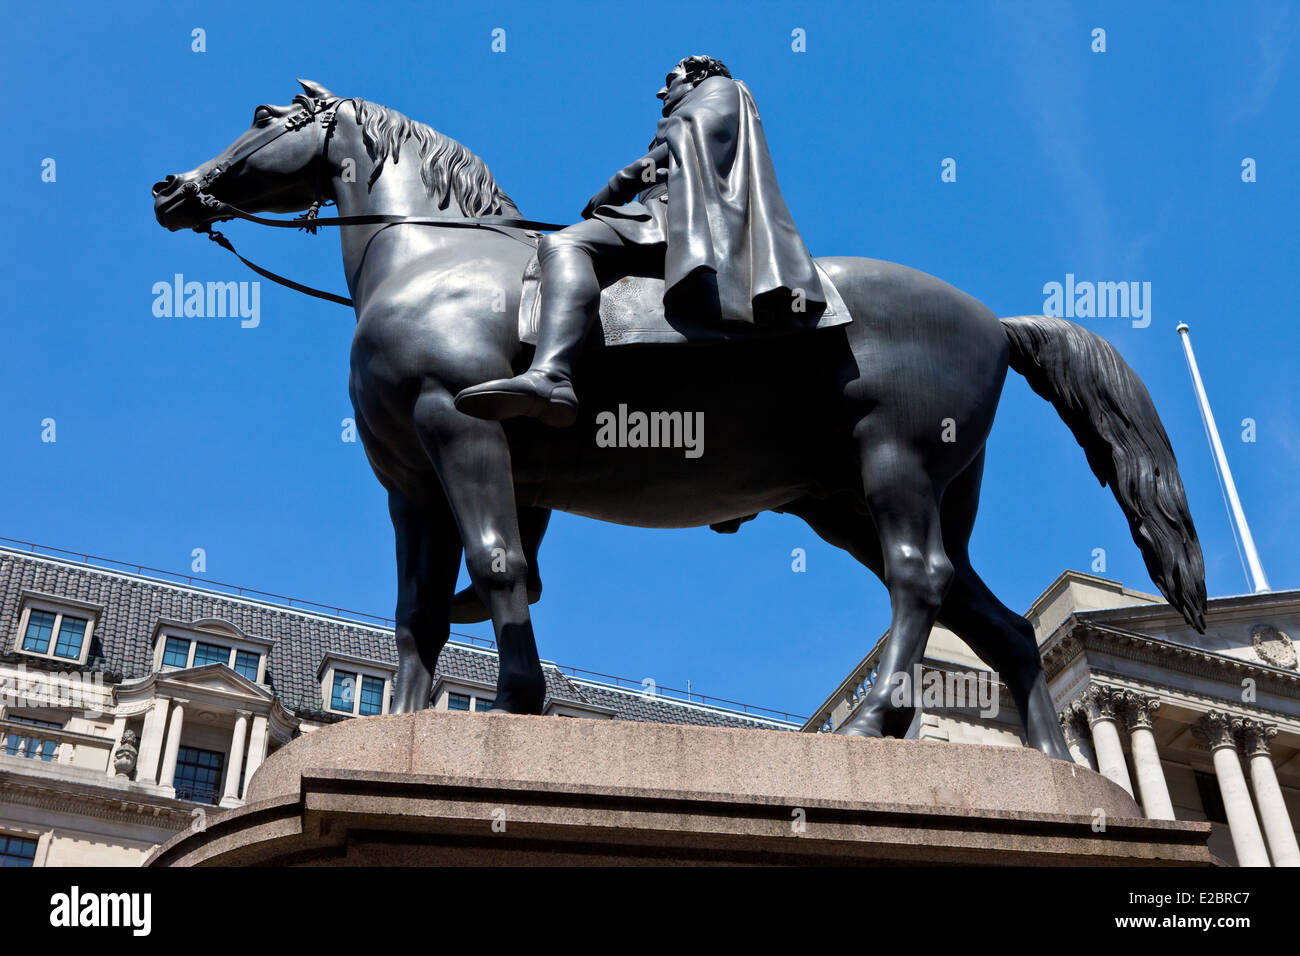 The Duke of Wellington statue situated outside the Bank of England in London. Stock Photo